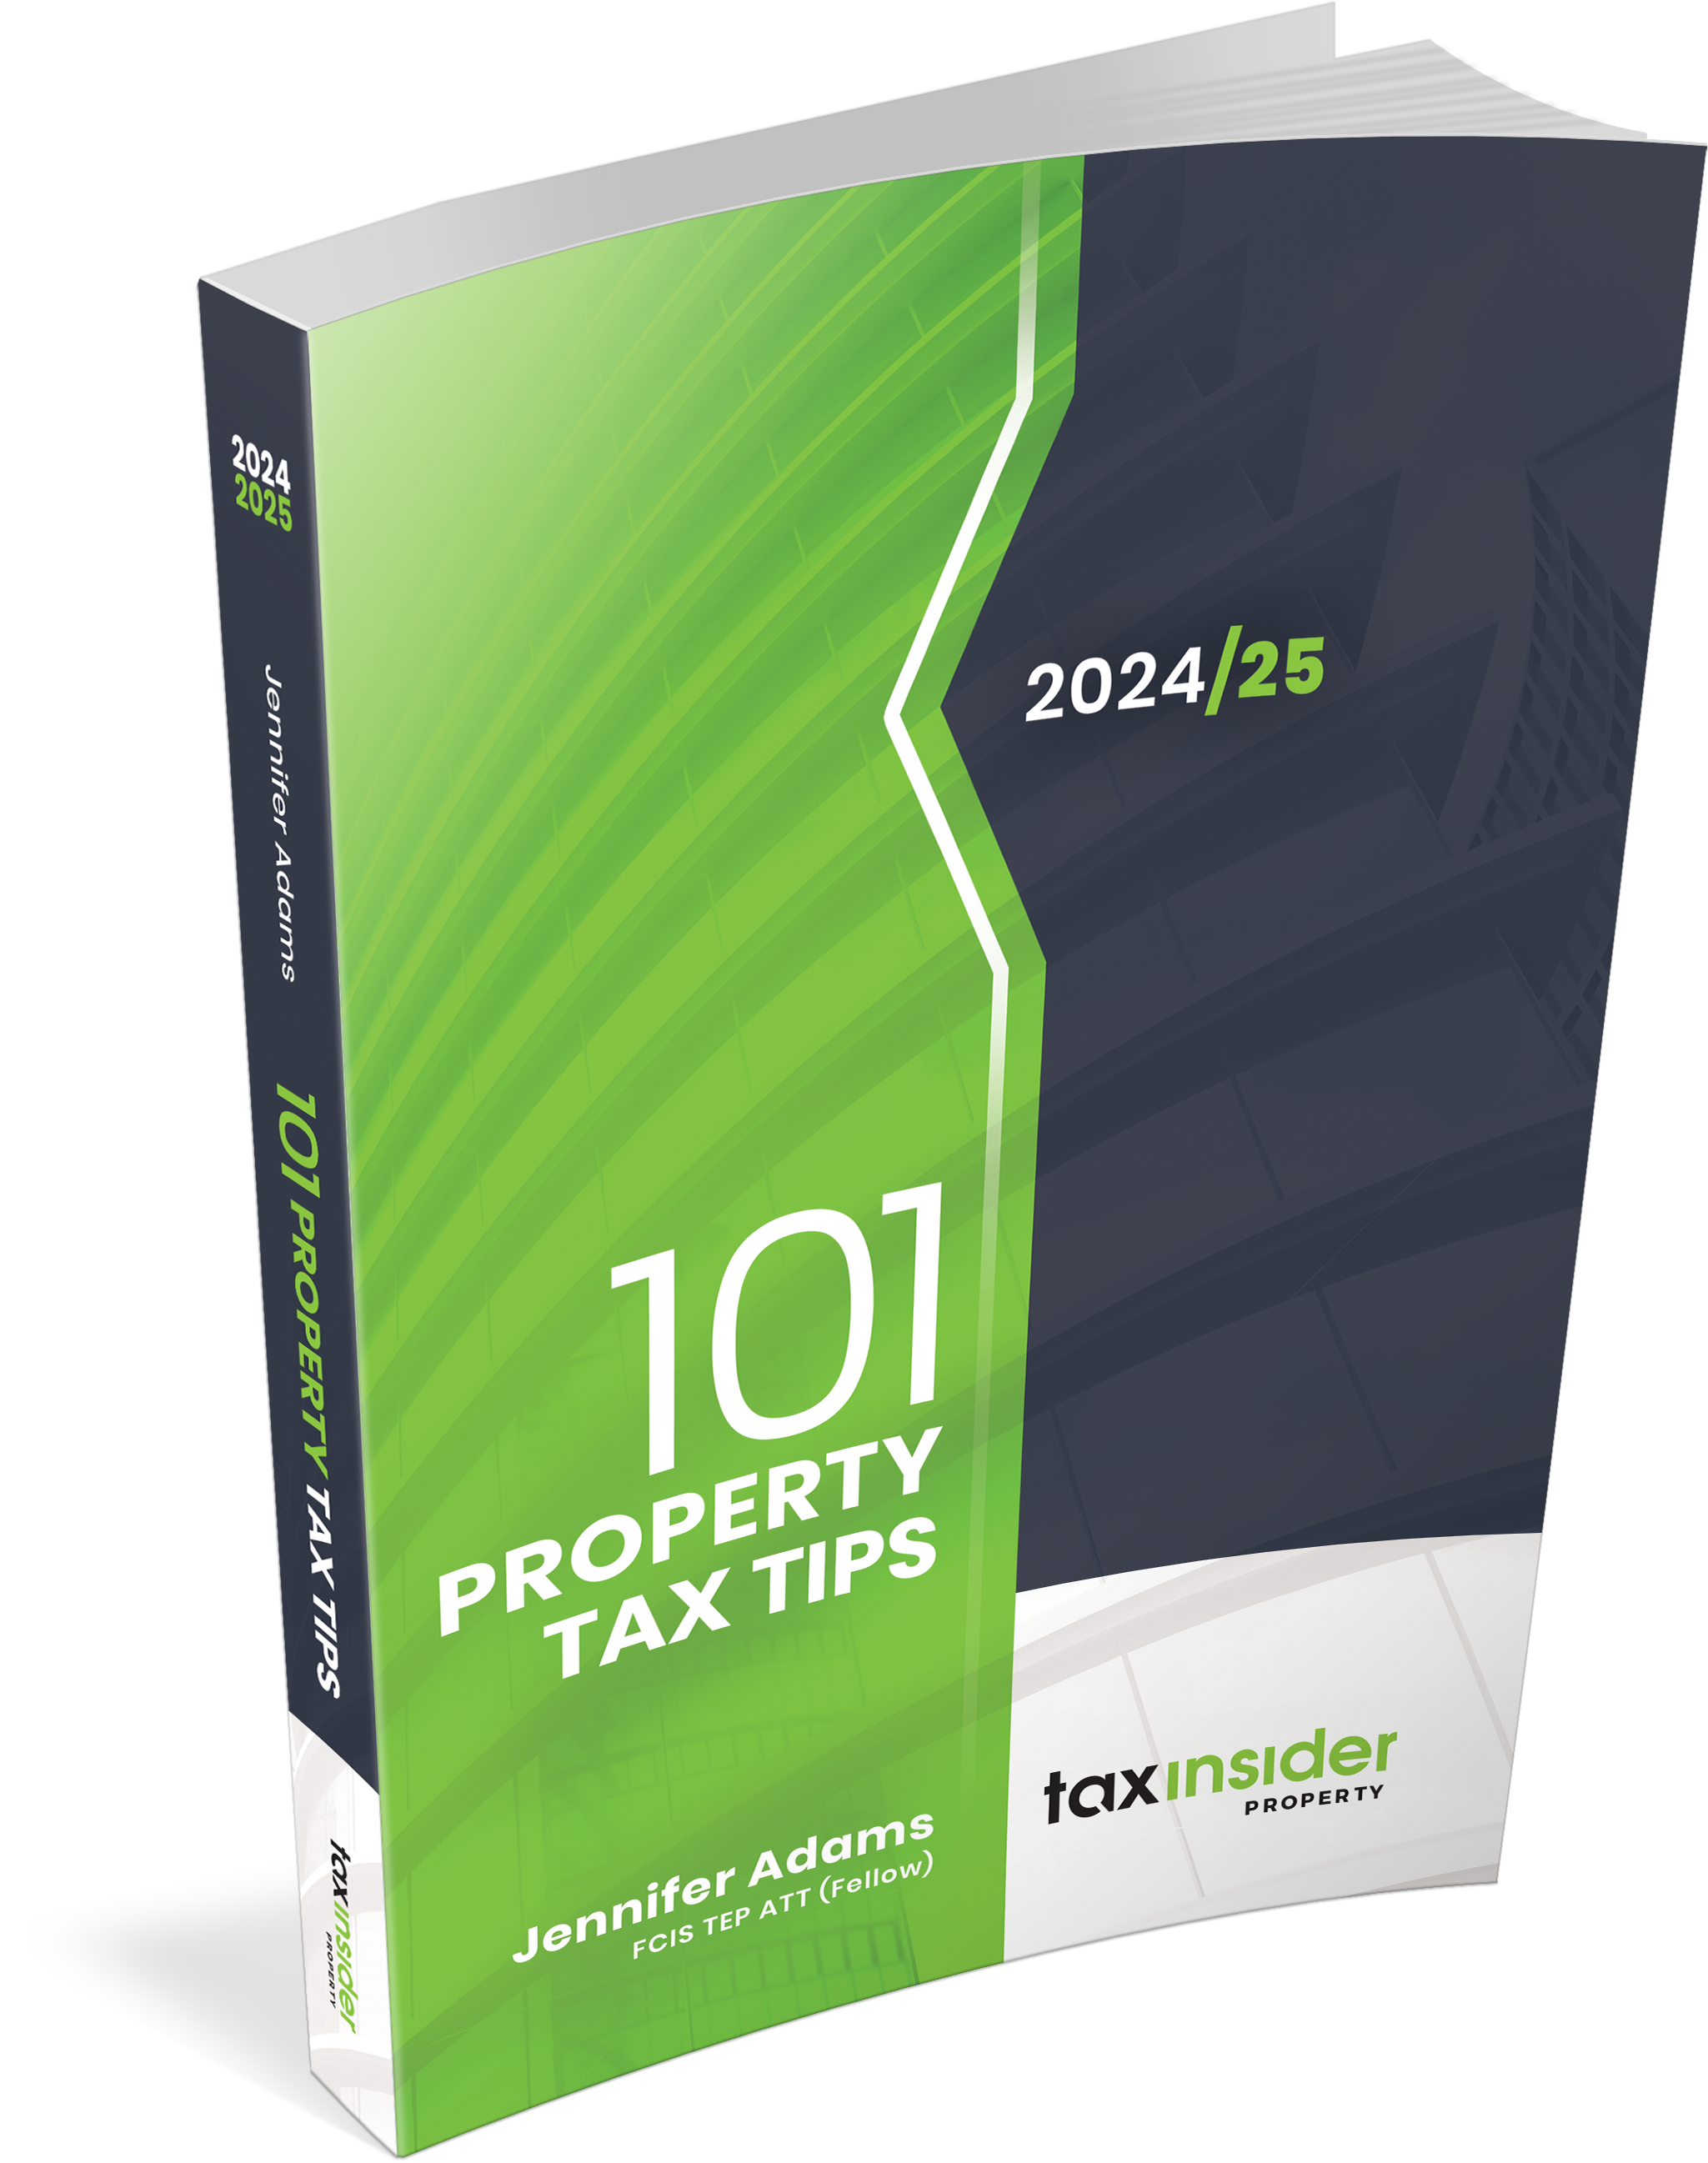 101 Property Tax Tips book cover